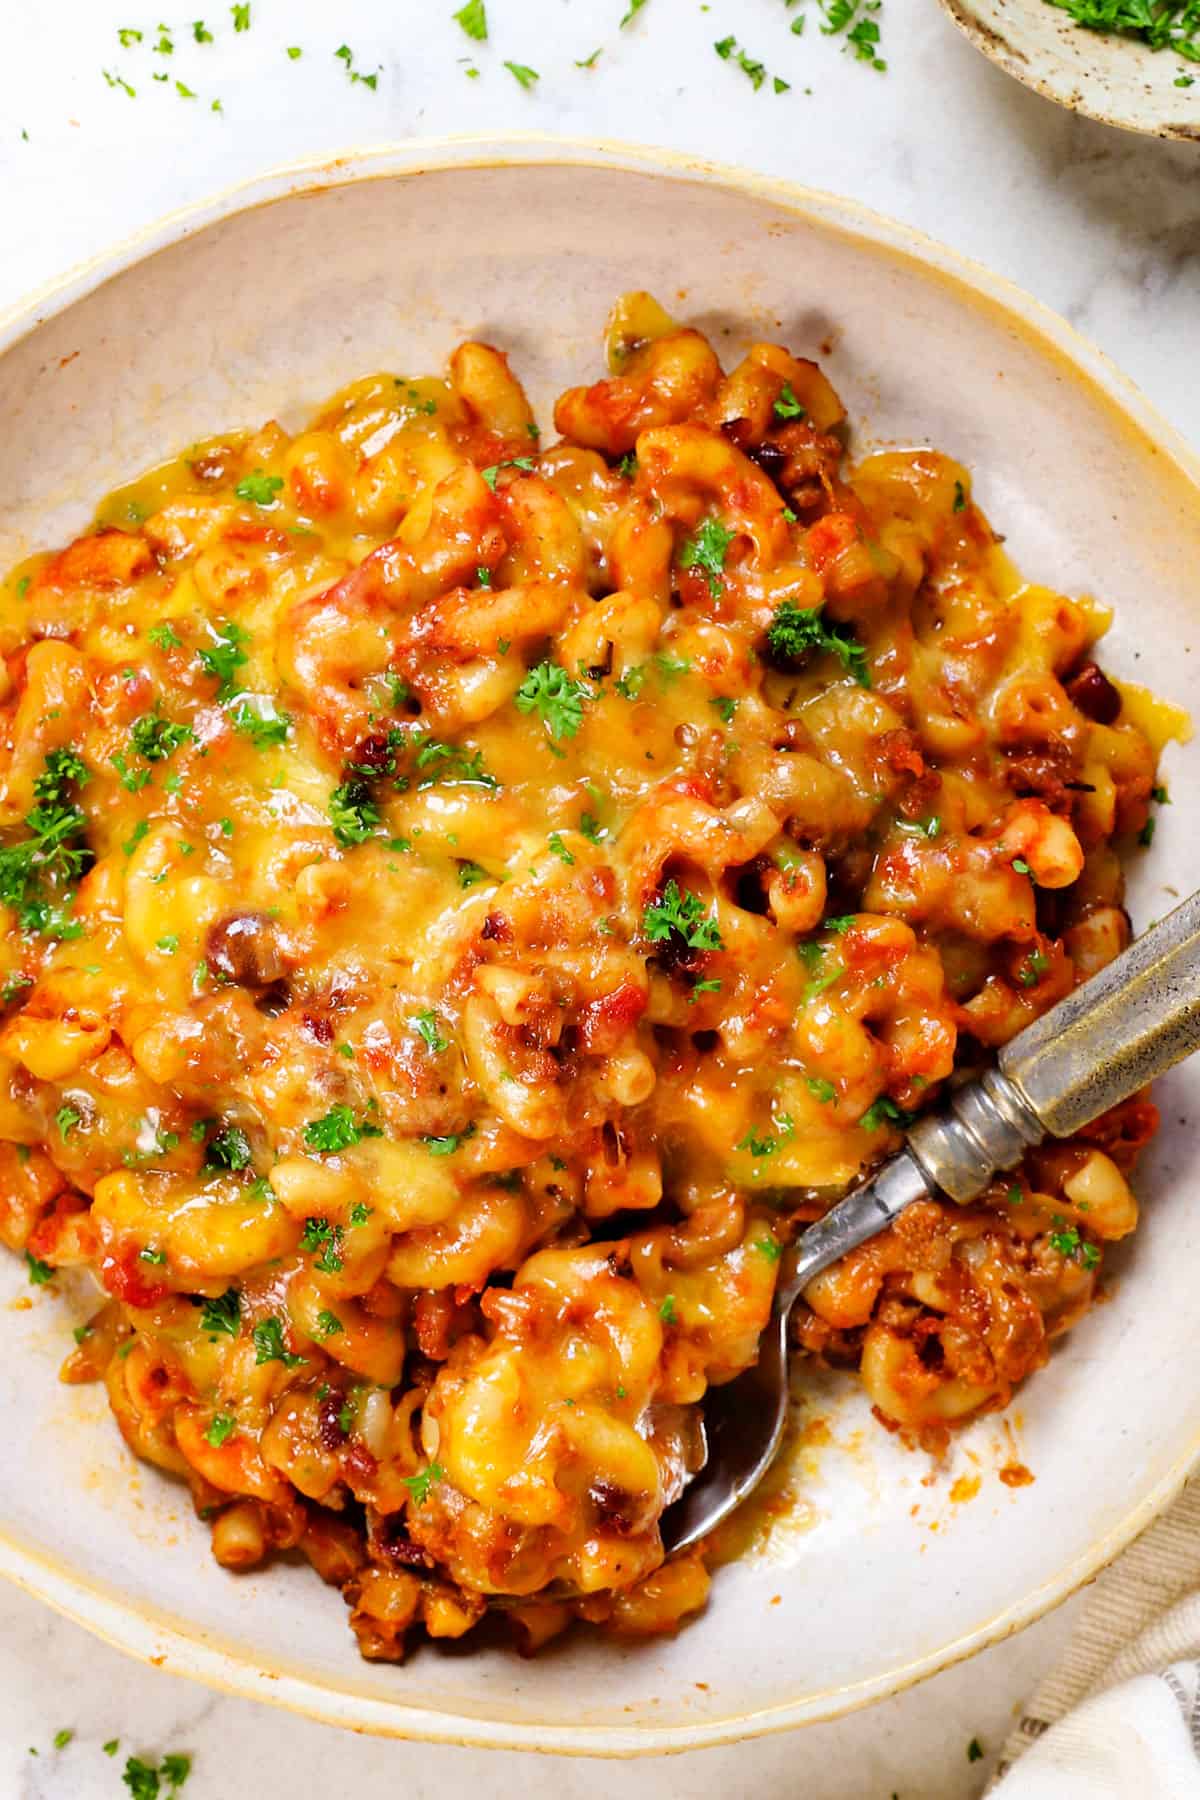 serving chili mac recipe on a plate topped with cheese